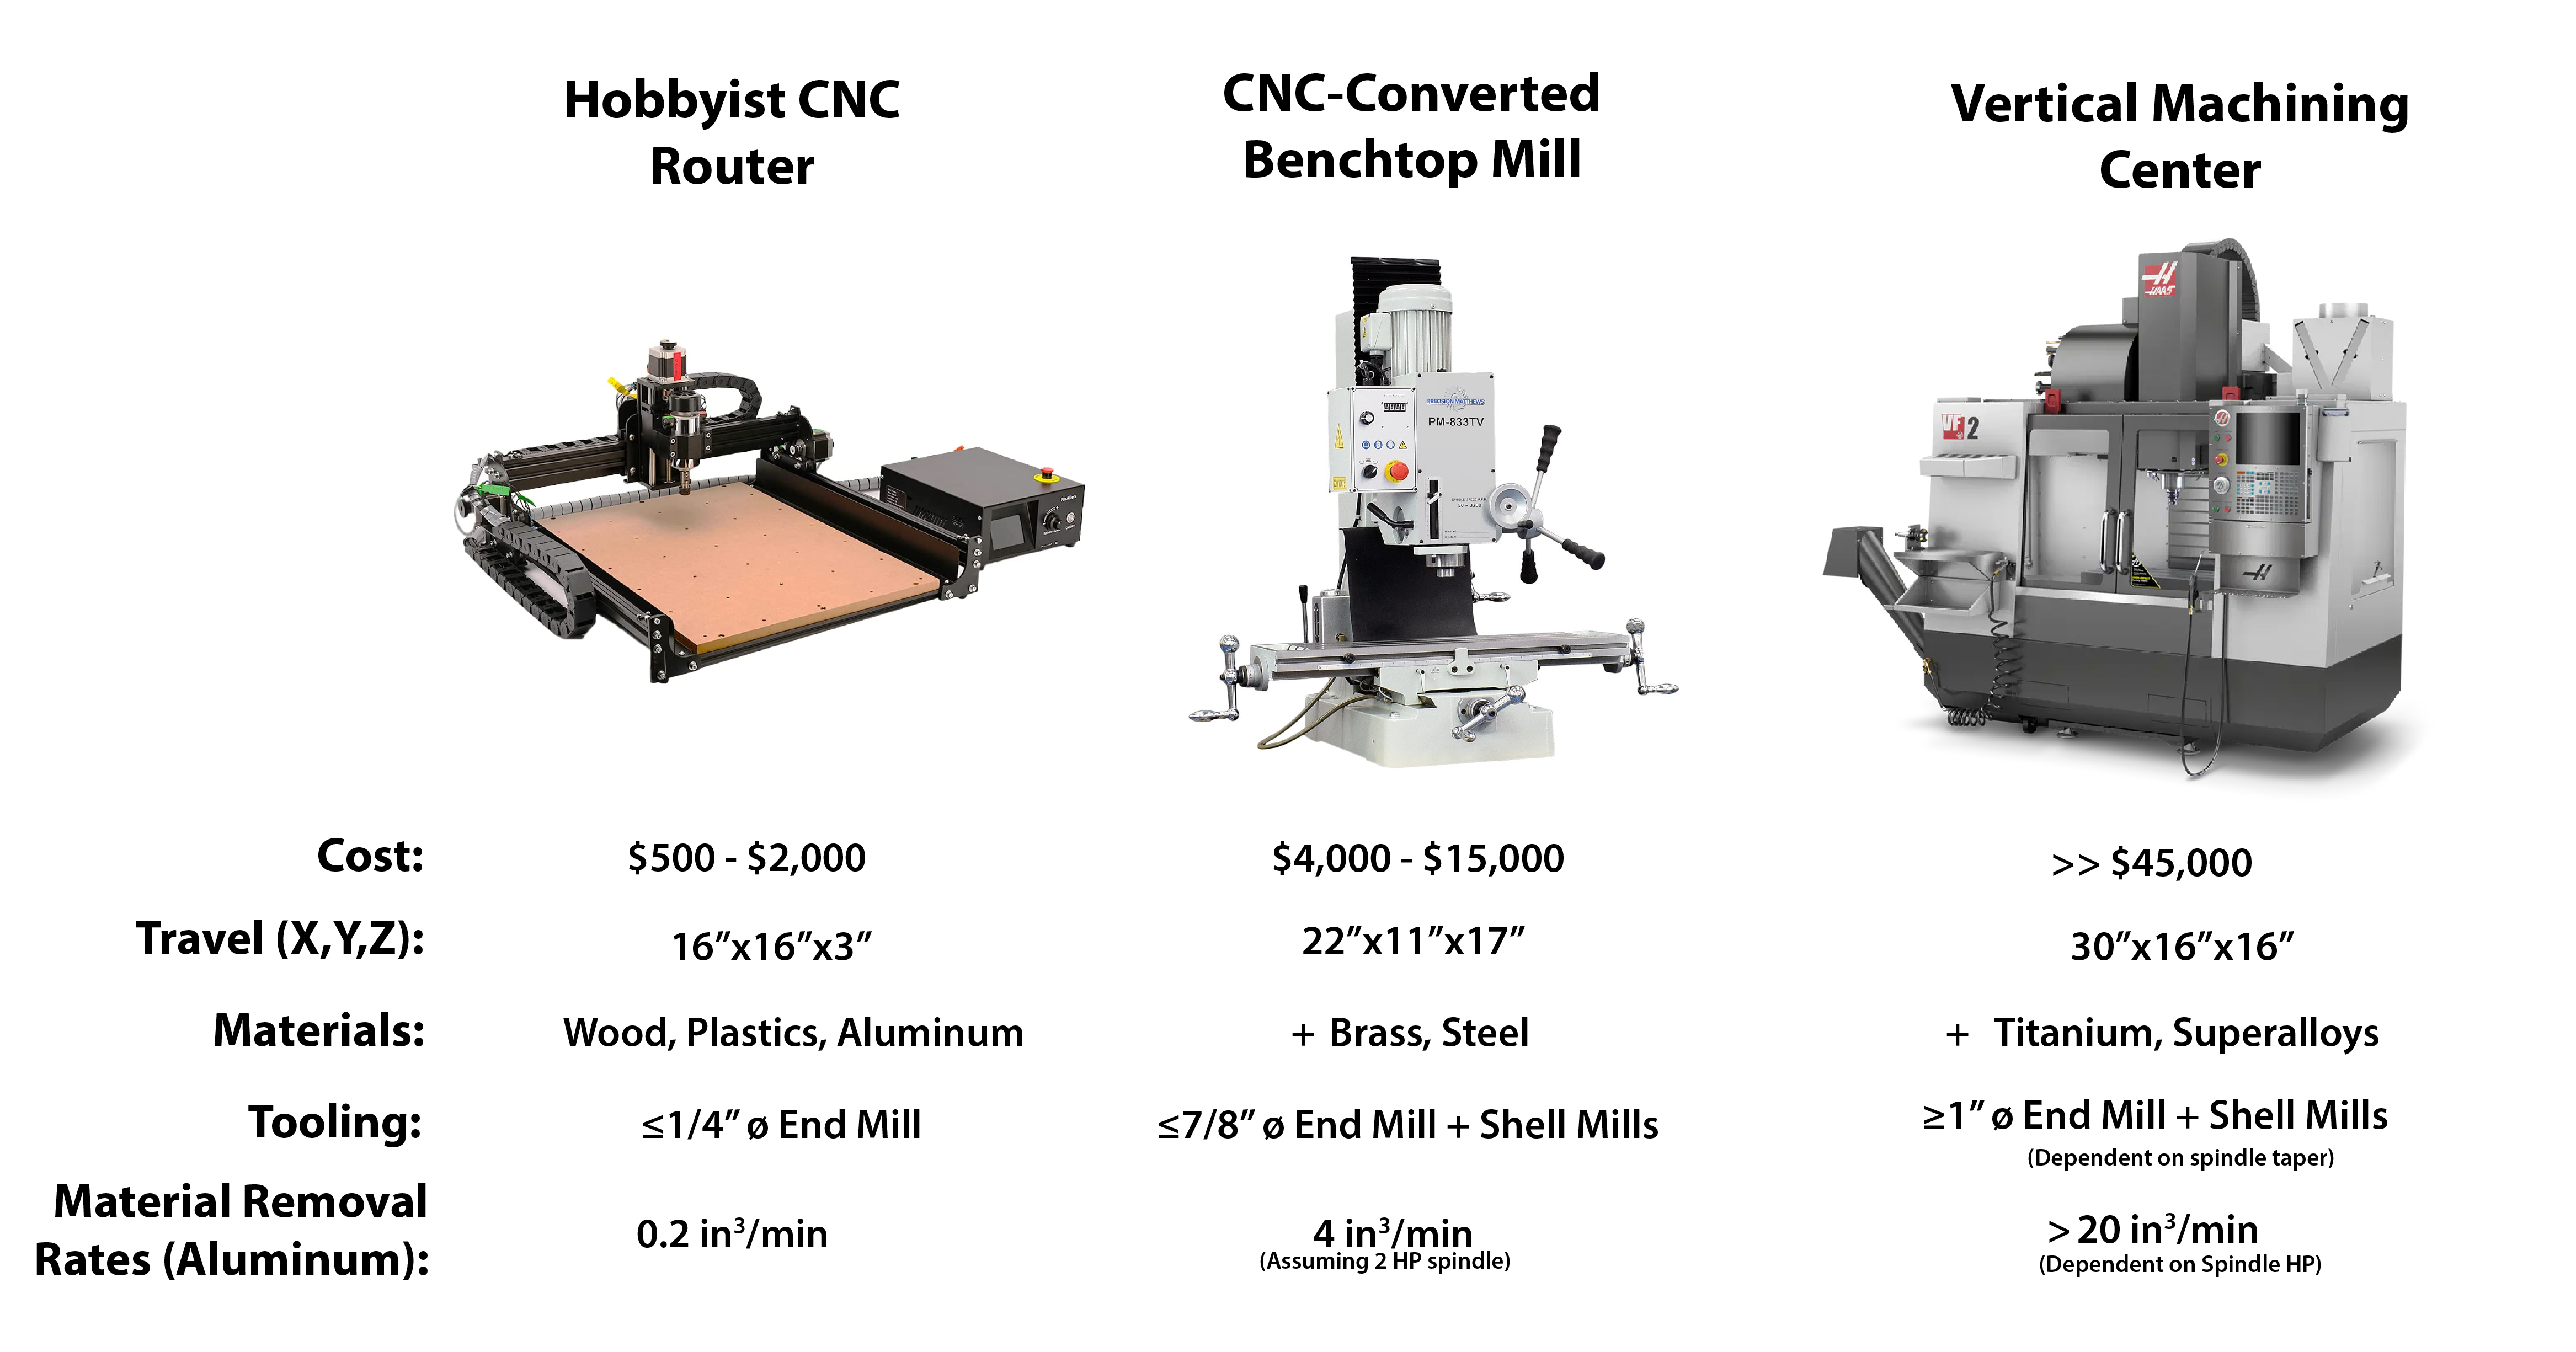 A somewhat silly comparison of a CNC router vs a benchtop mill vs a vertical machining center in the context of cost, travel, cuttable materials, tooling, and material removal rates. 